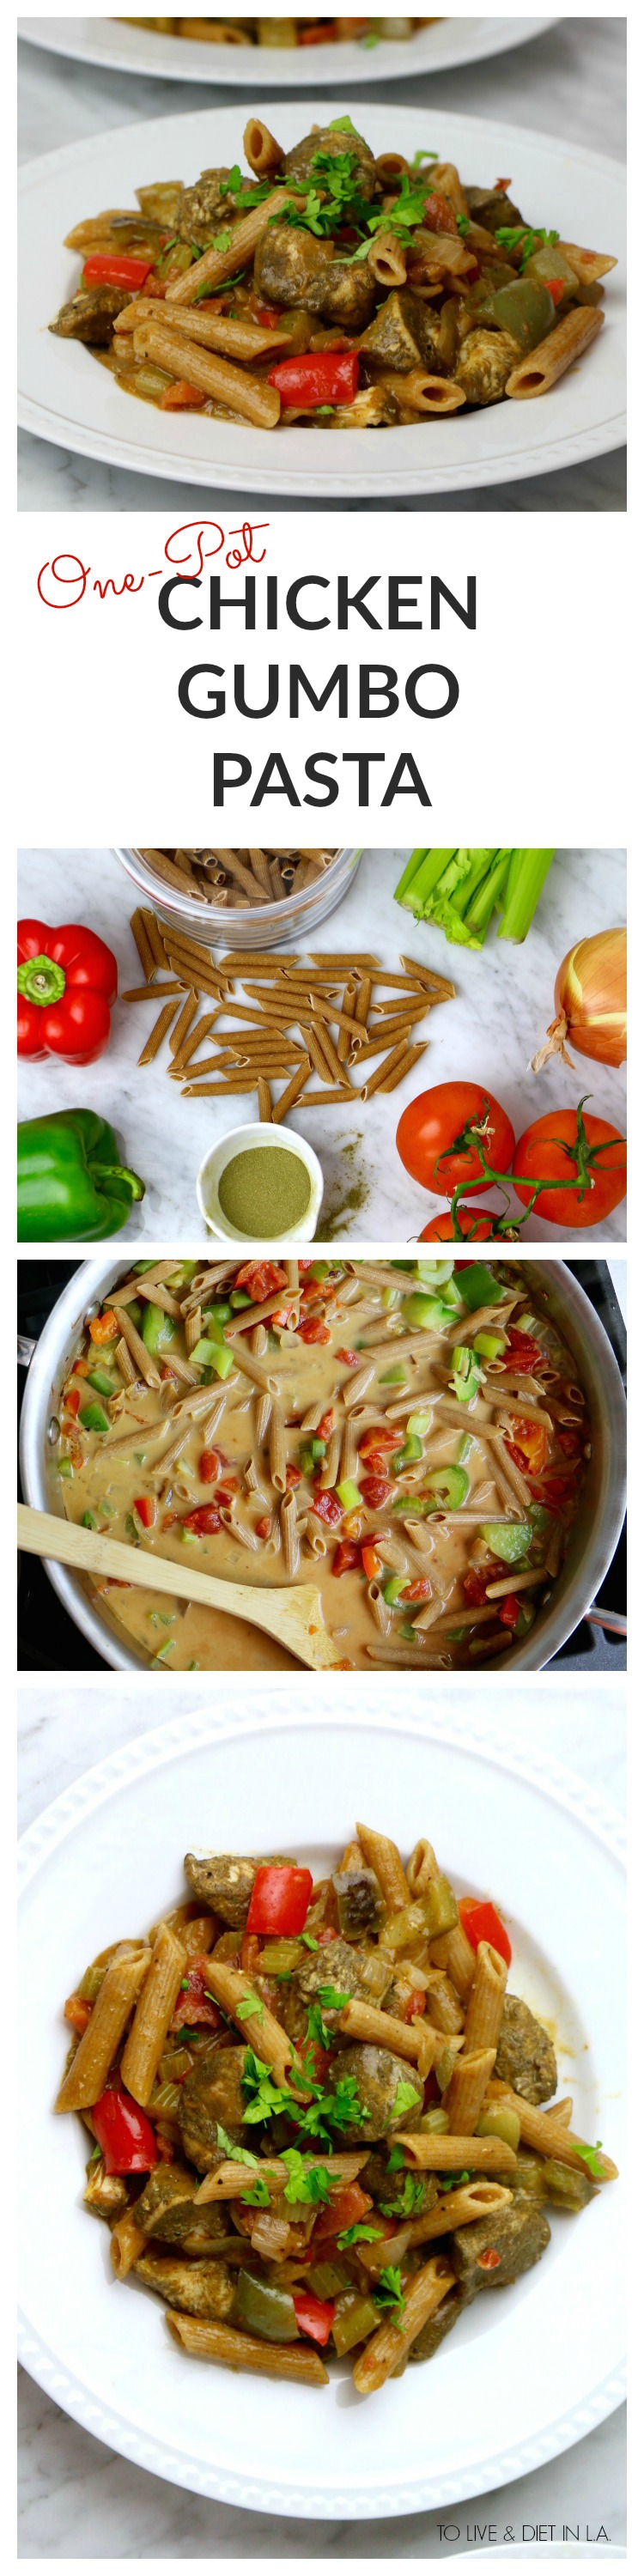 One-Pot Chicken Gumbo Pasta - a quick, no-fuss weeknight dinner with healthy whole grain pasta, lean chicken protein, and fresh vegetables. Healthy, easy, delicious! 